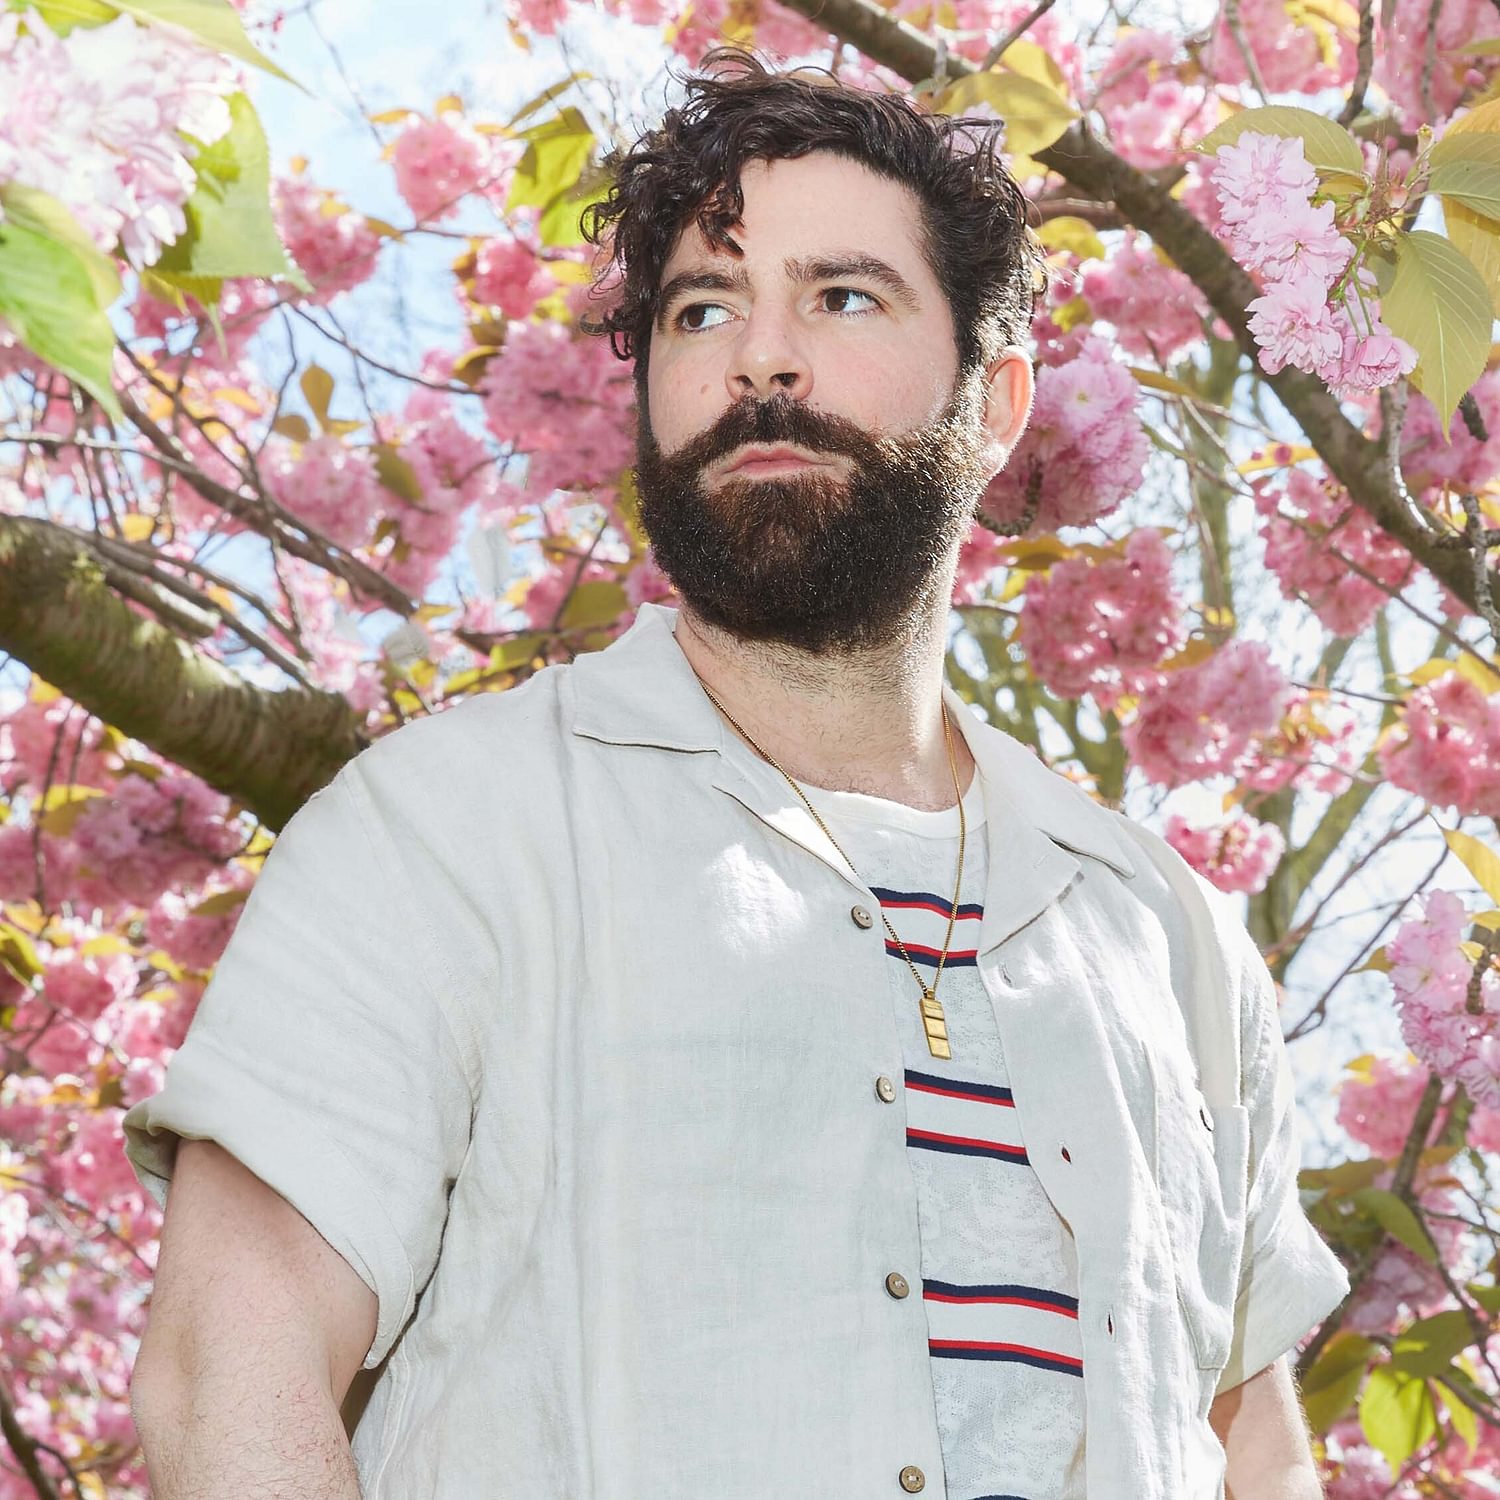 Yannis Philippakis on working with Tony Allen, their collaborative project Yannis & The Yaw, and new EP 'Lagos, Paris, London'